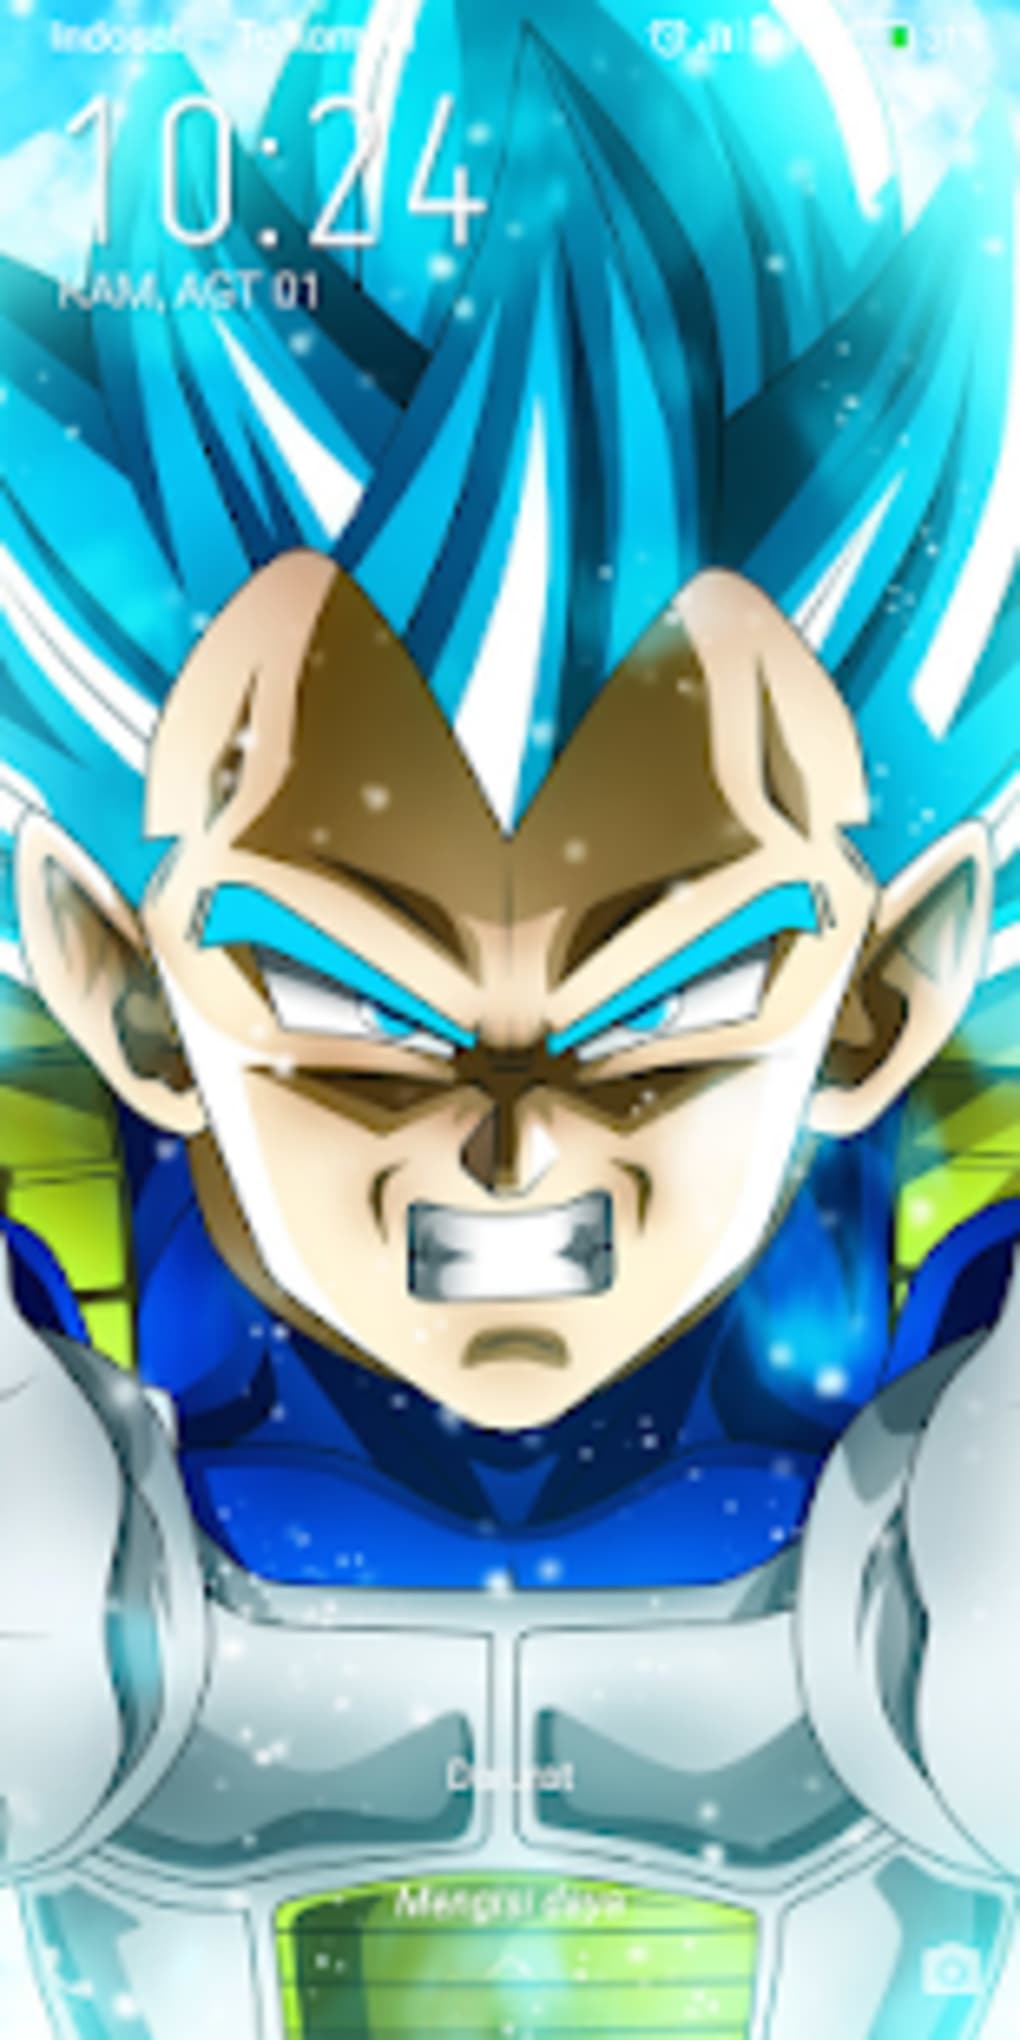 Dragon Ball Super Wallpapers APK for Android Download